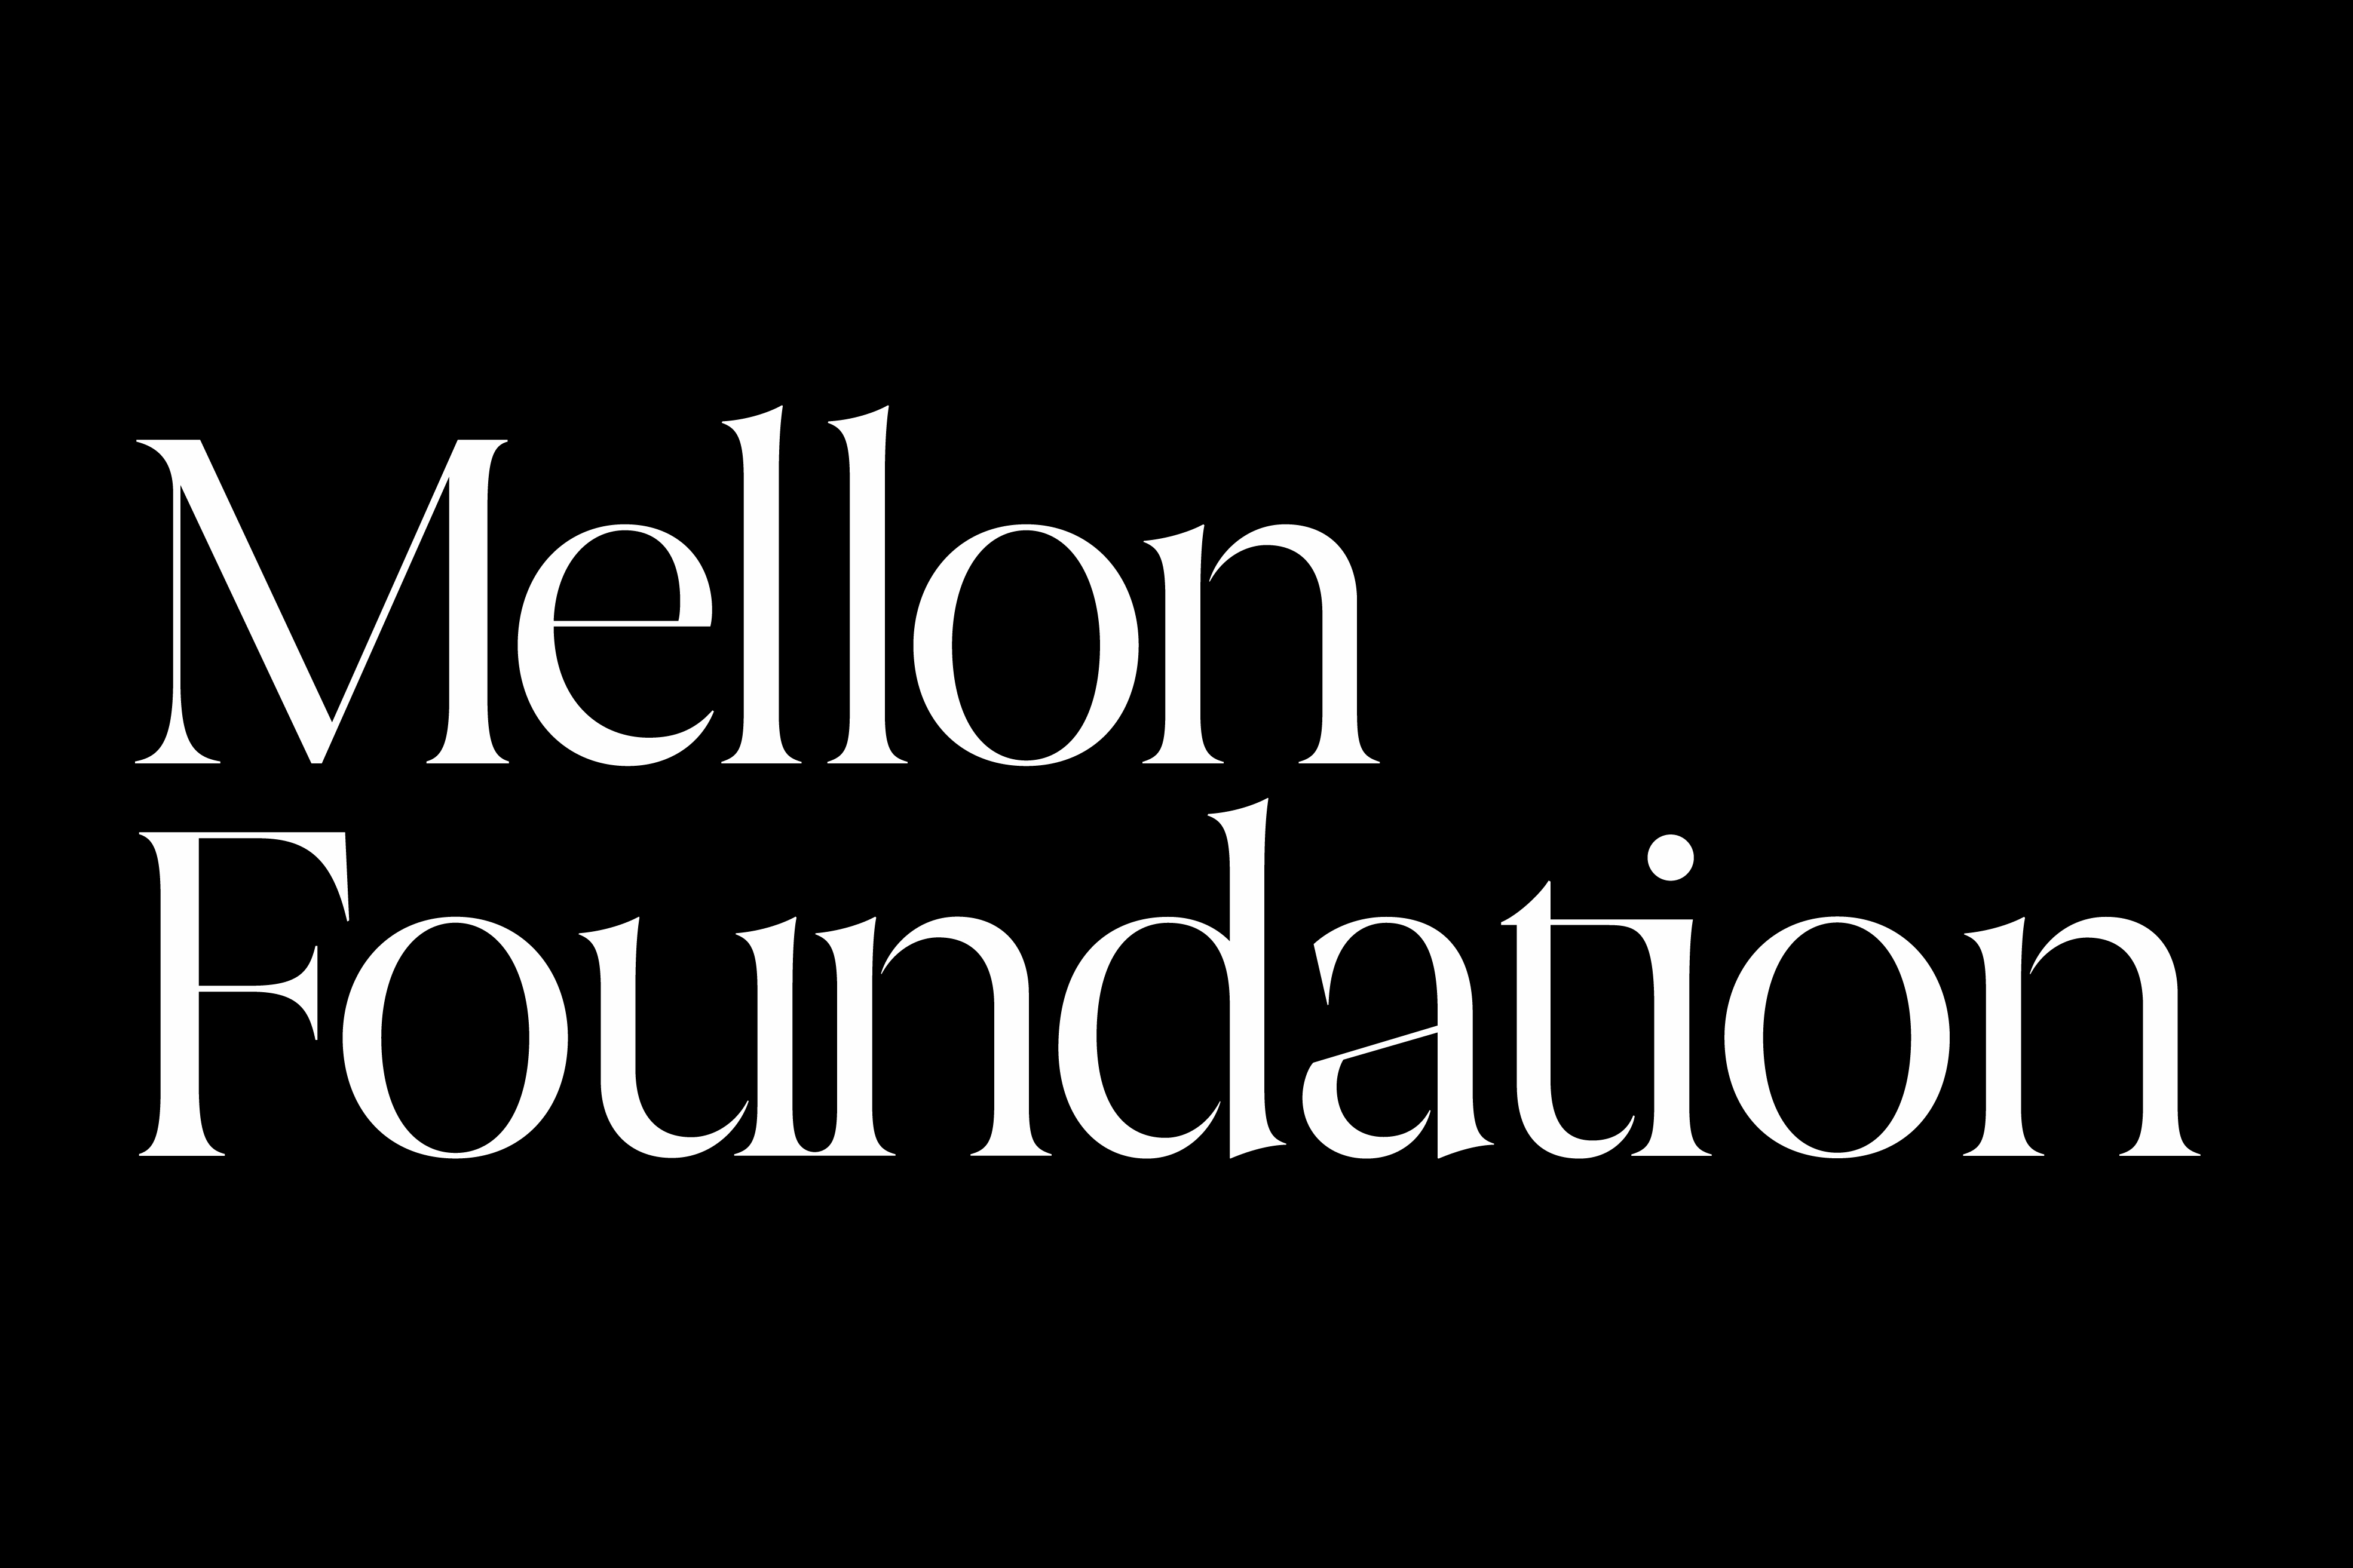 Against a black background reads 'Mellon Foundation' in white text